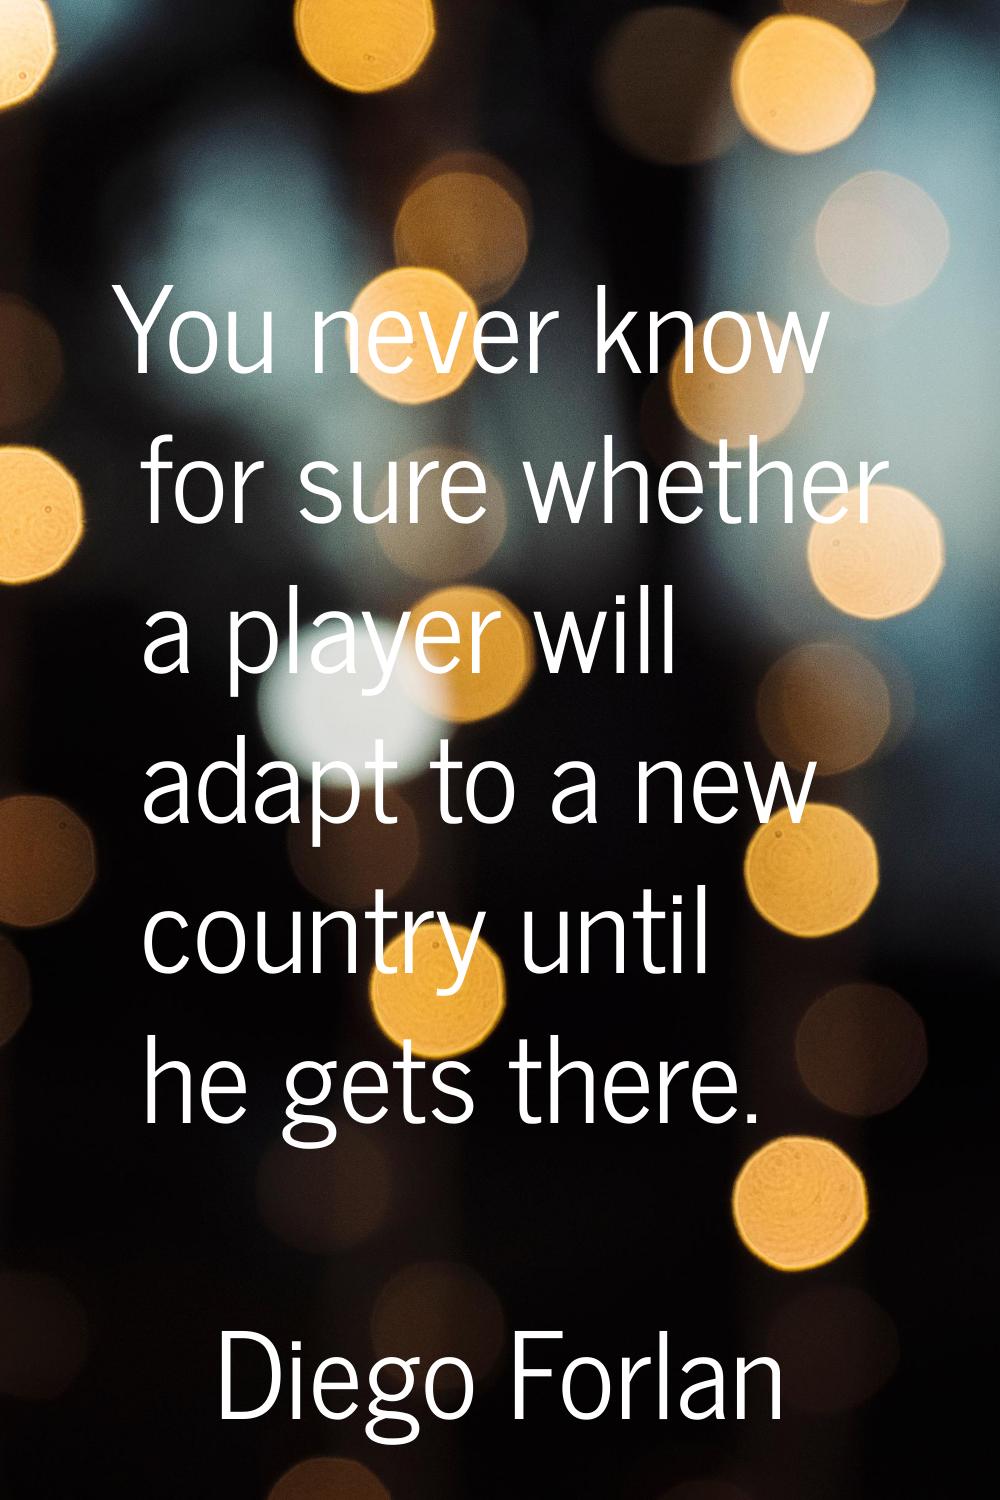 You never know for sure whether a player will adapt to a new country until he gets there.